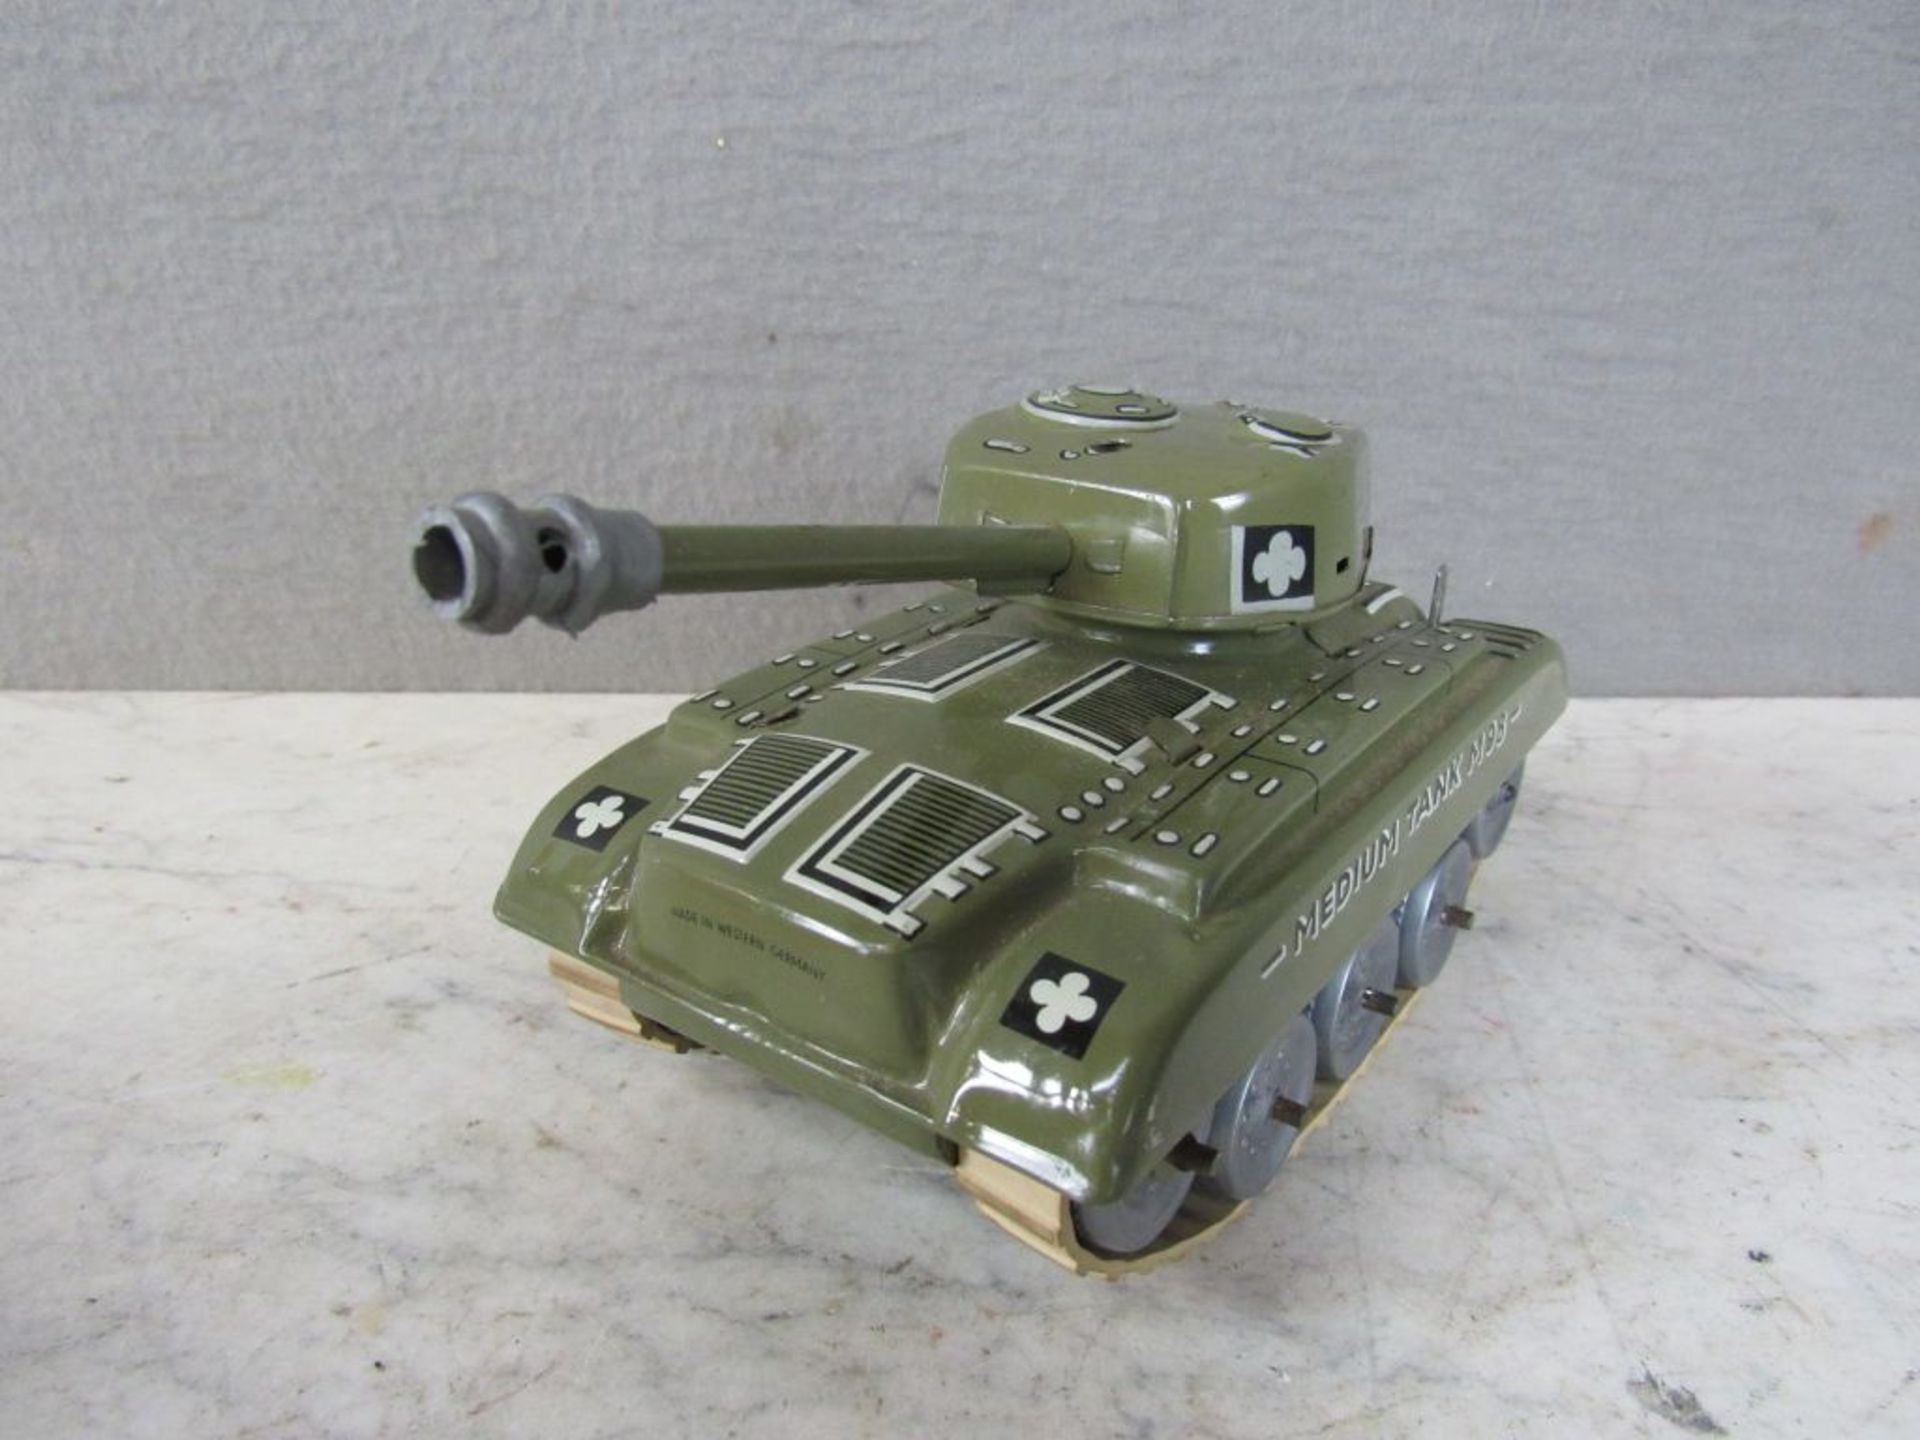 Blechspielzeug Panzer Gama Modell 984 - Image 4 of 10